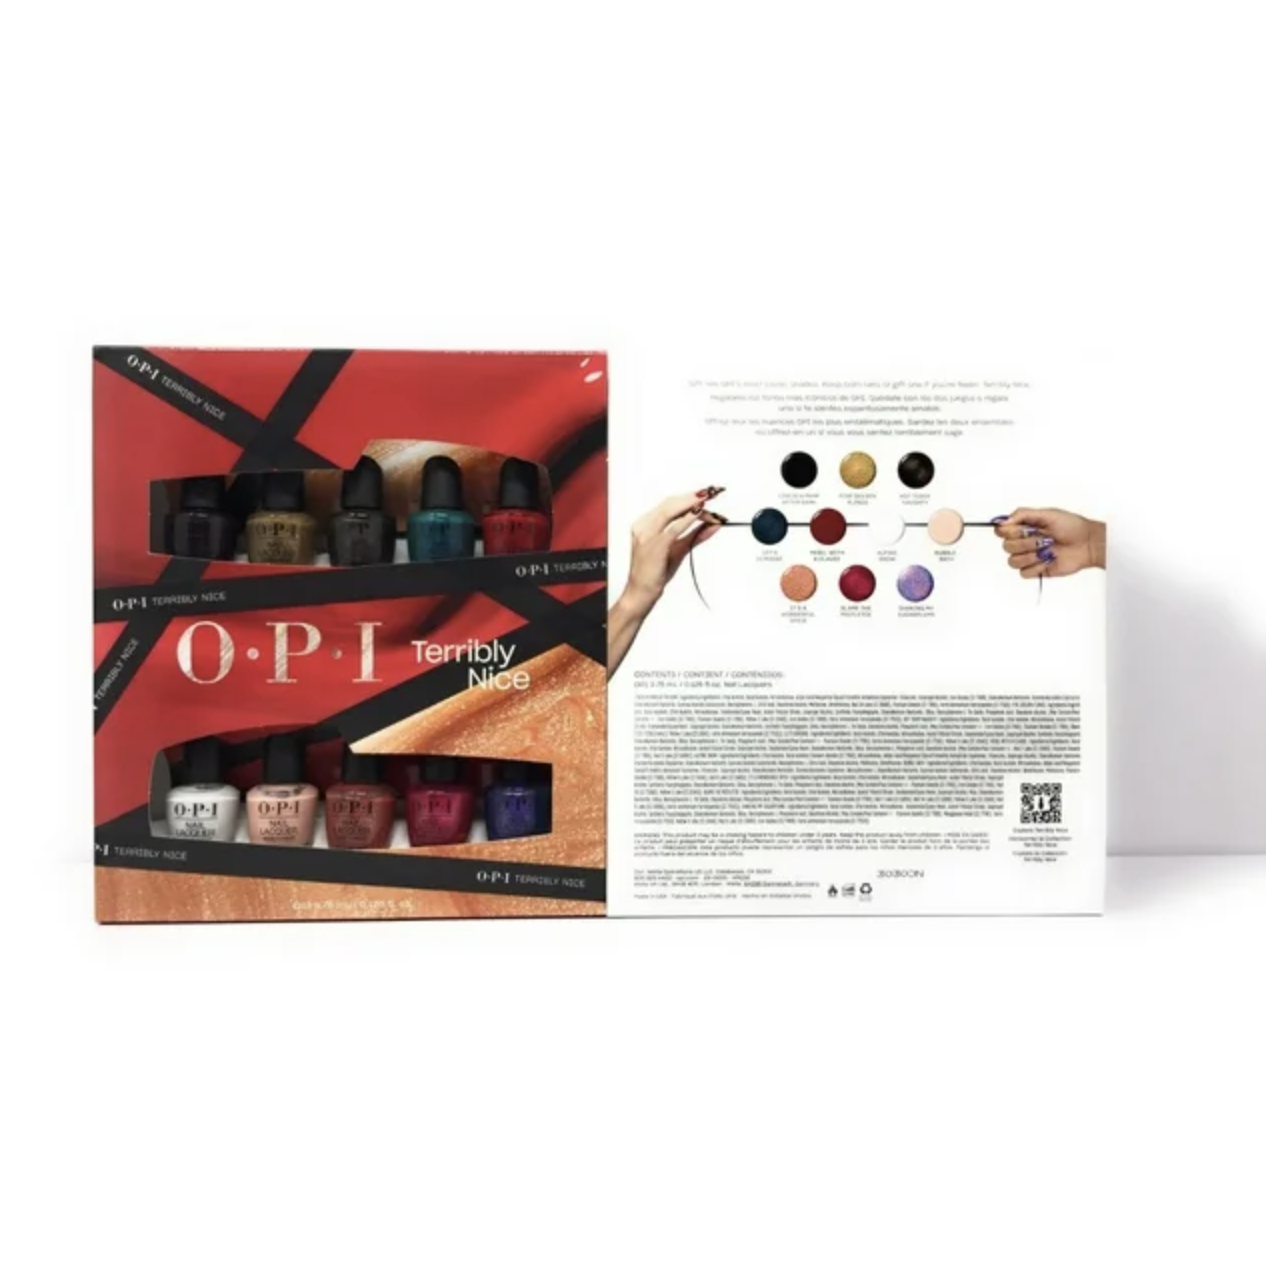 OPI nail polishes in black, gold, purple, red, white, dark green, and peach shades